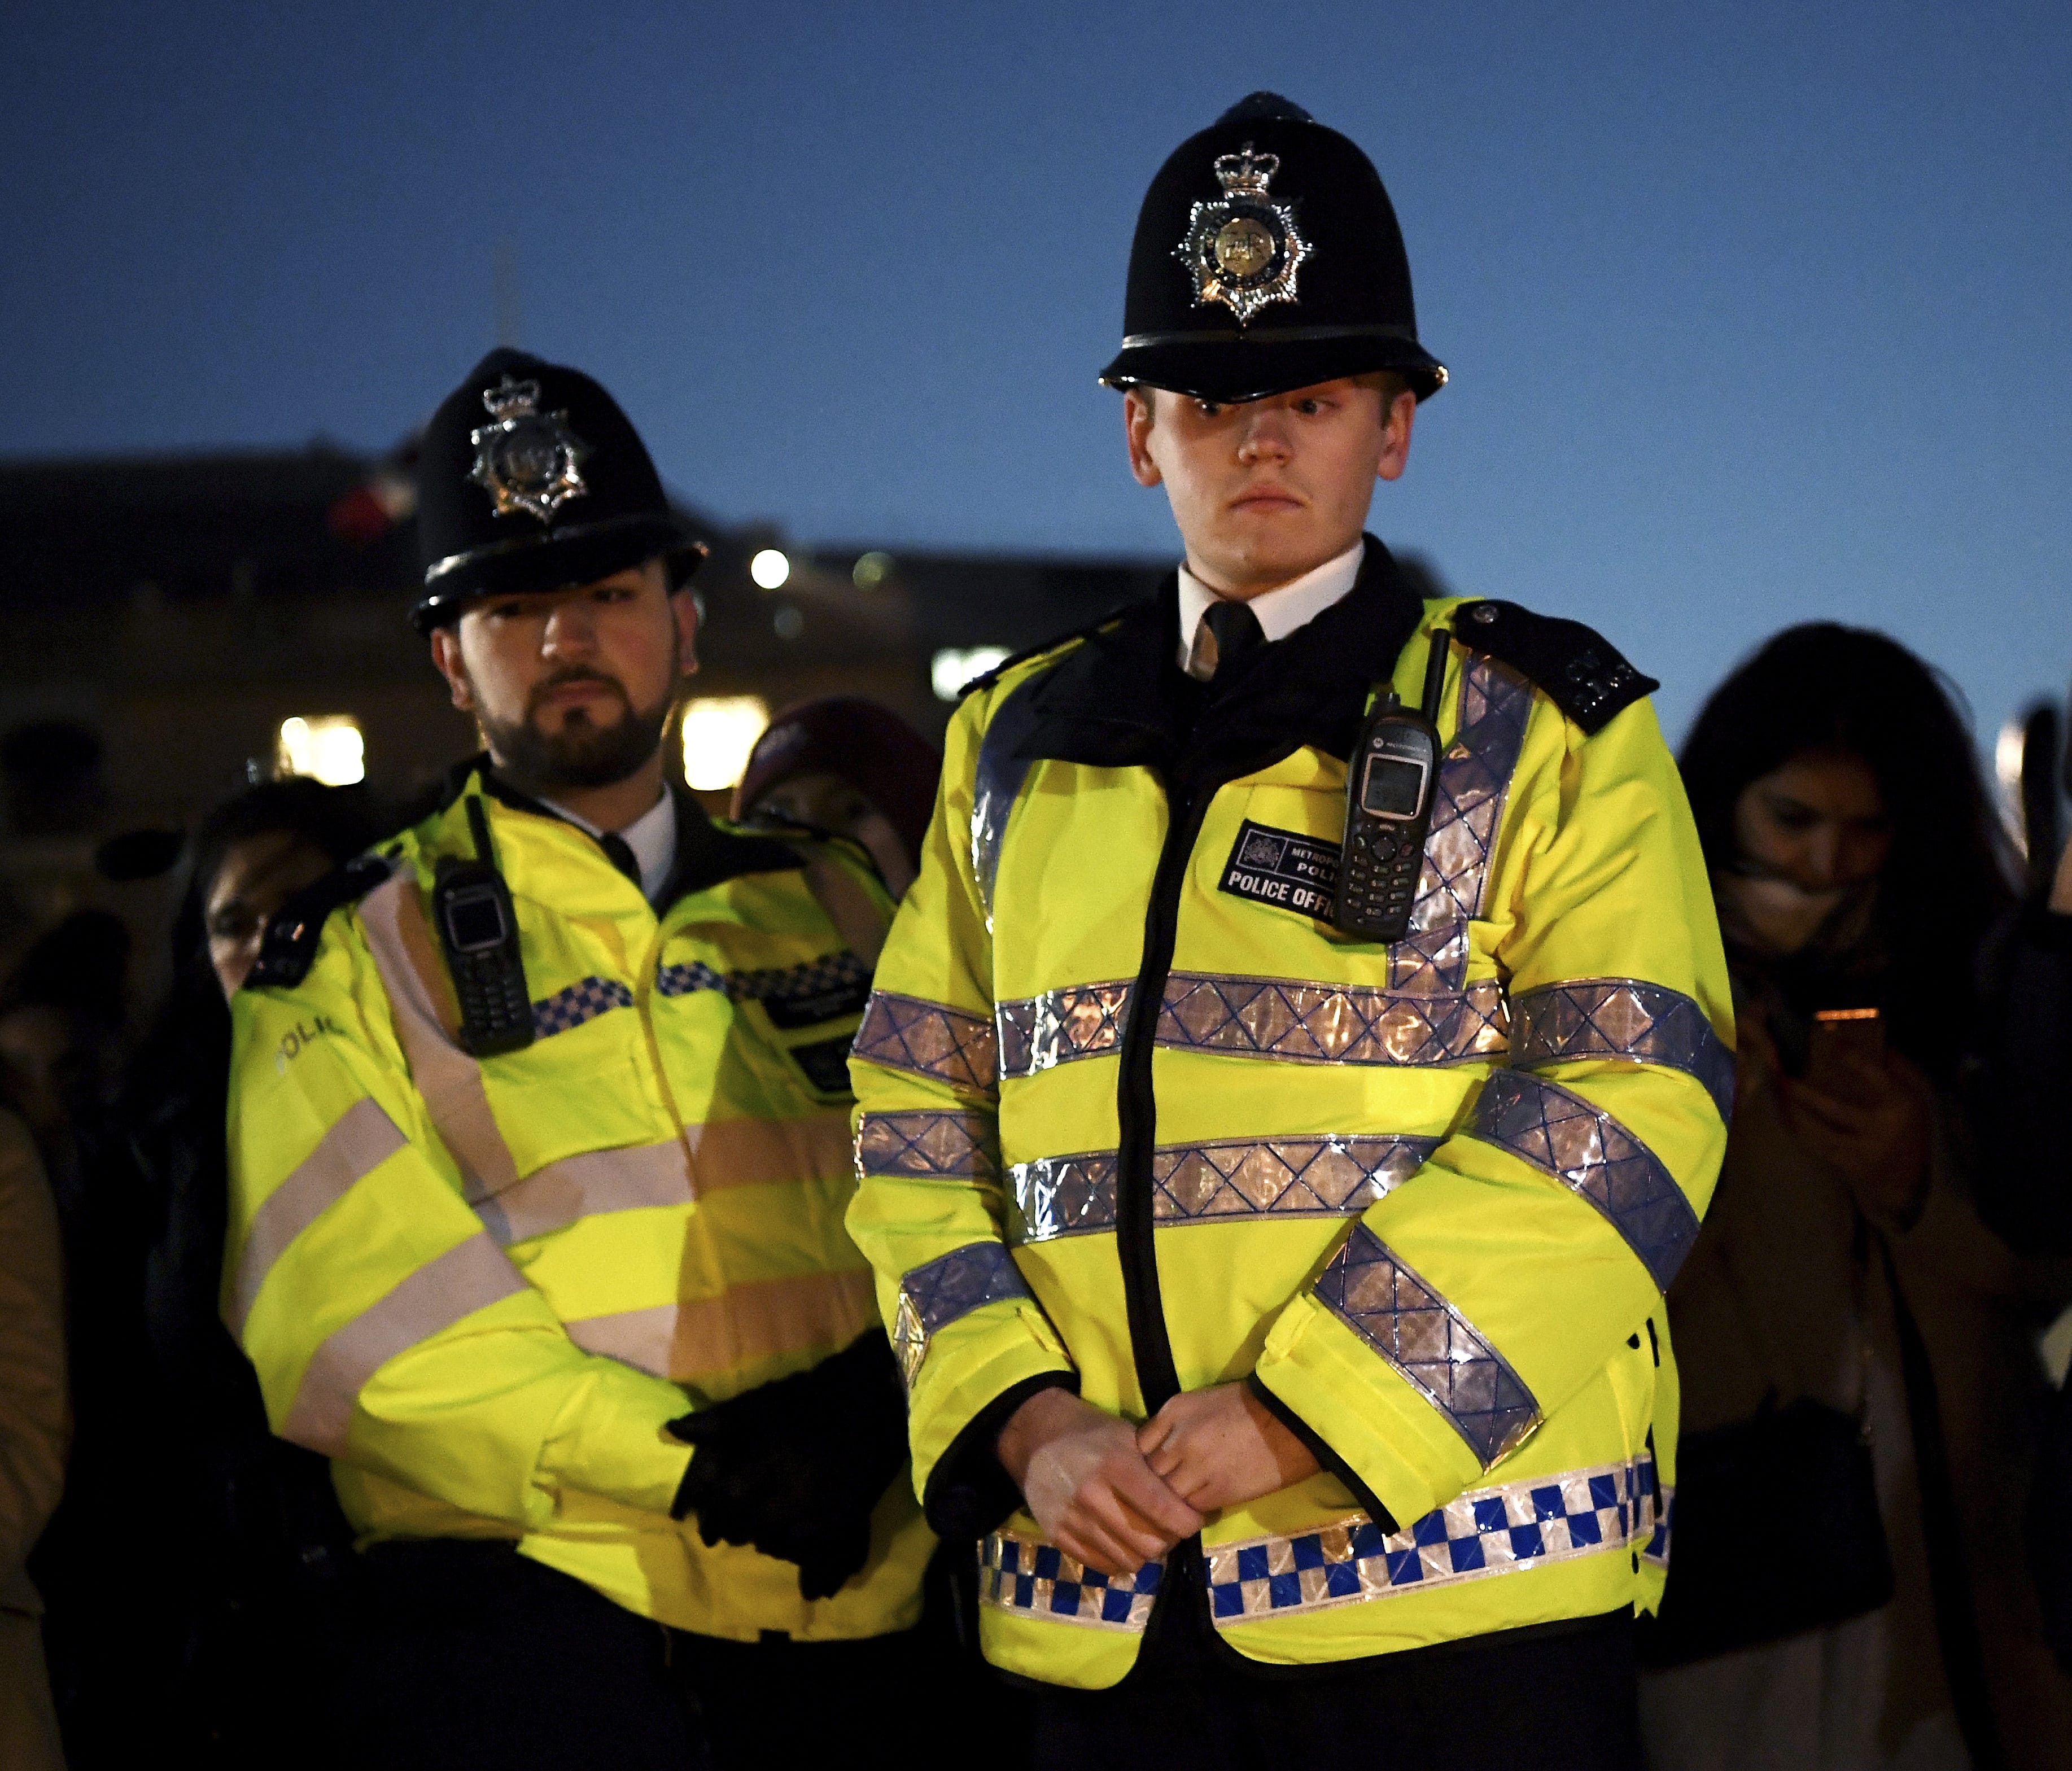 Two Metropolitan Police officers look on during a candlelit vigil at Trafalgar Square on March 23, 2017 in London.